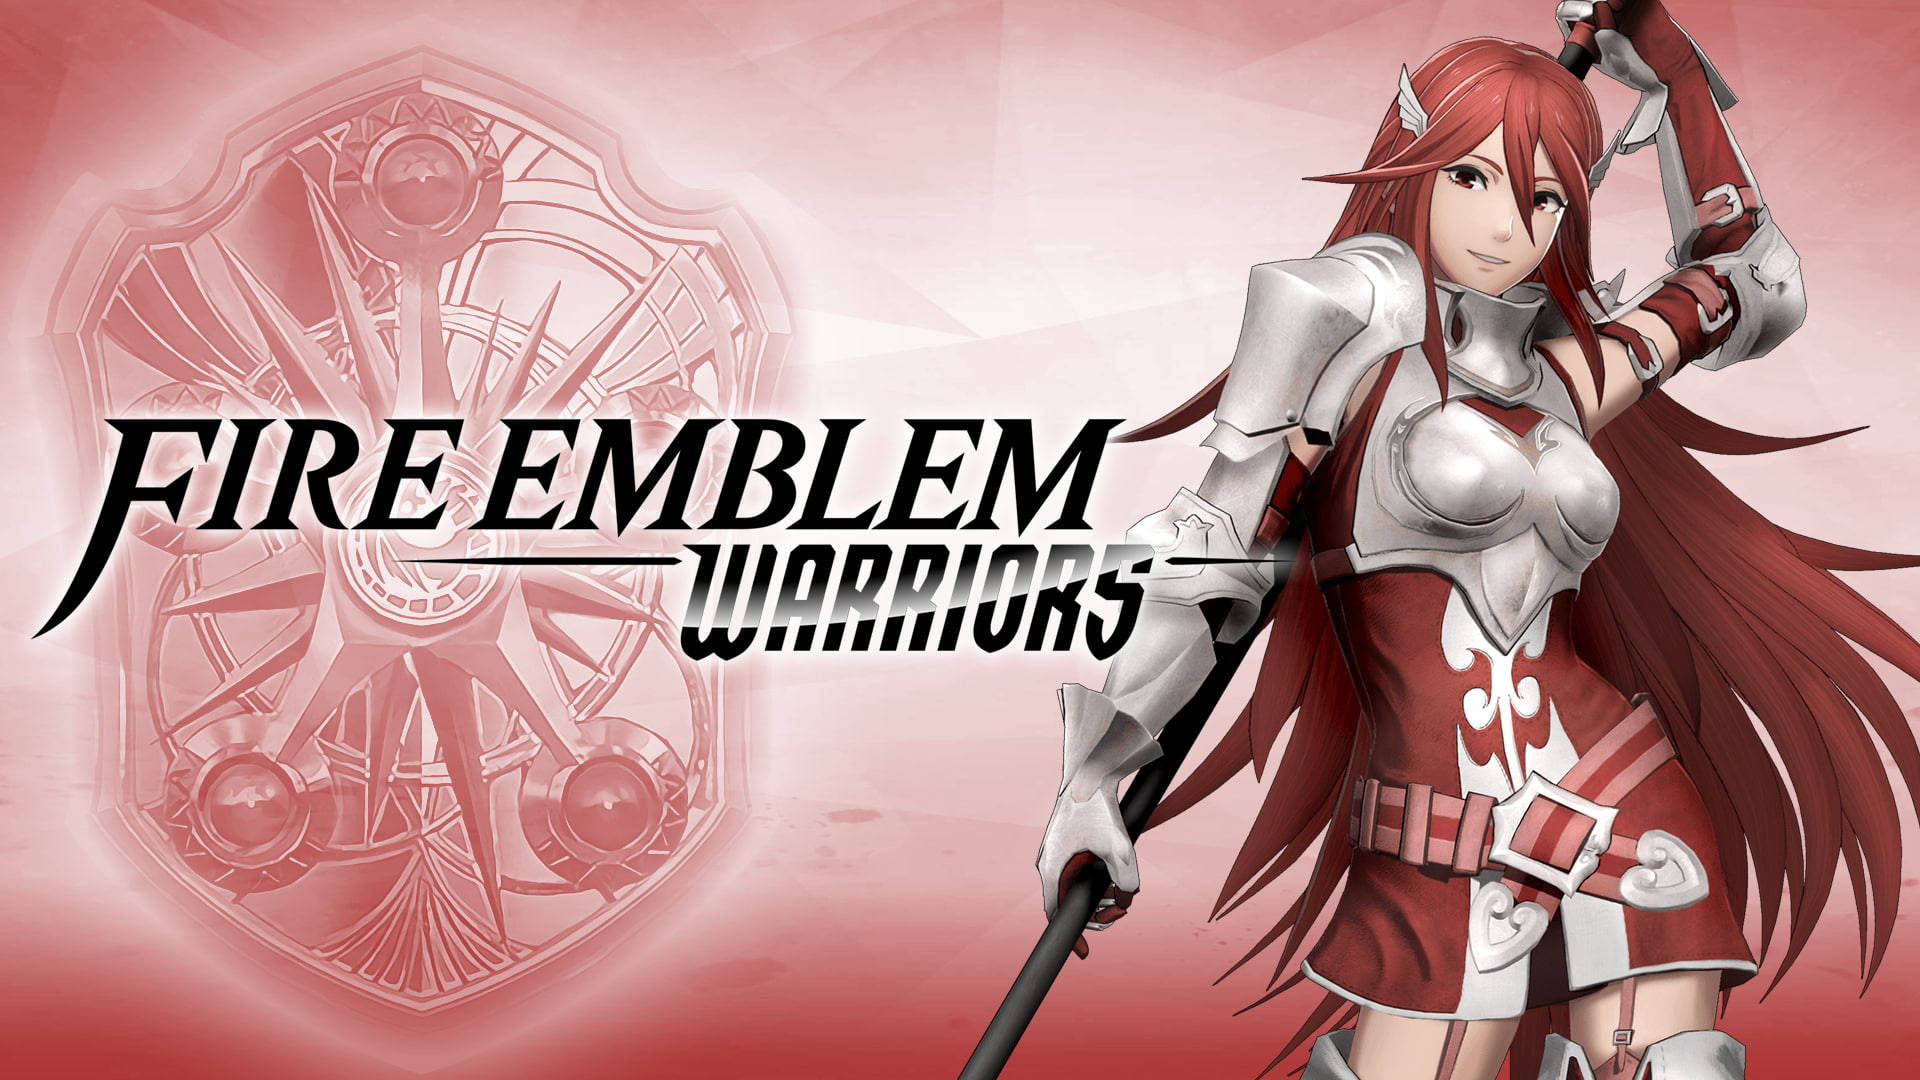 Brand Emblem Krigare Cordelia Huvud Outfit Wallpaper